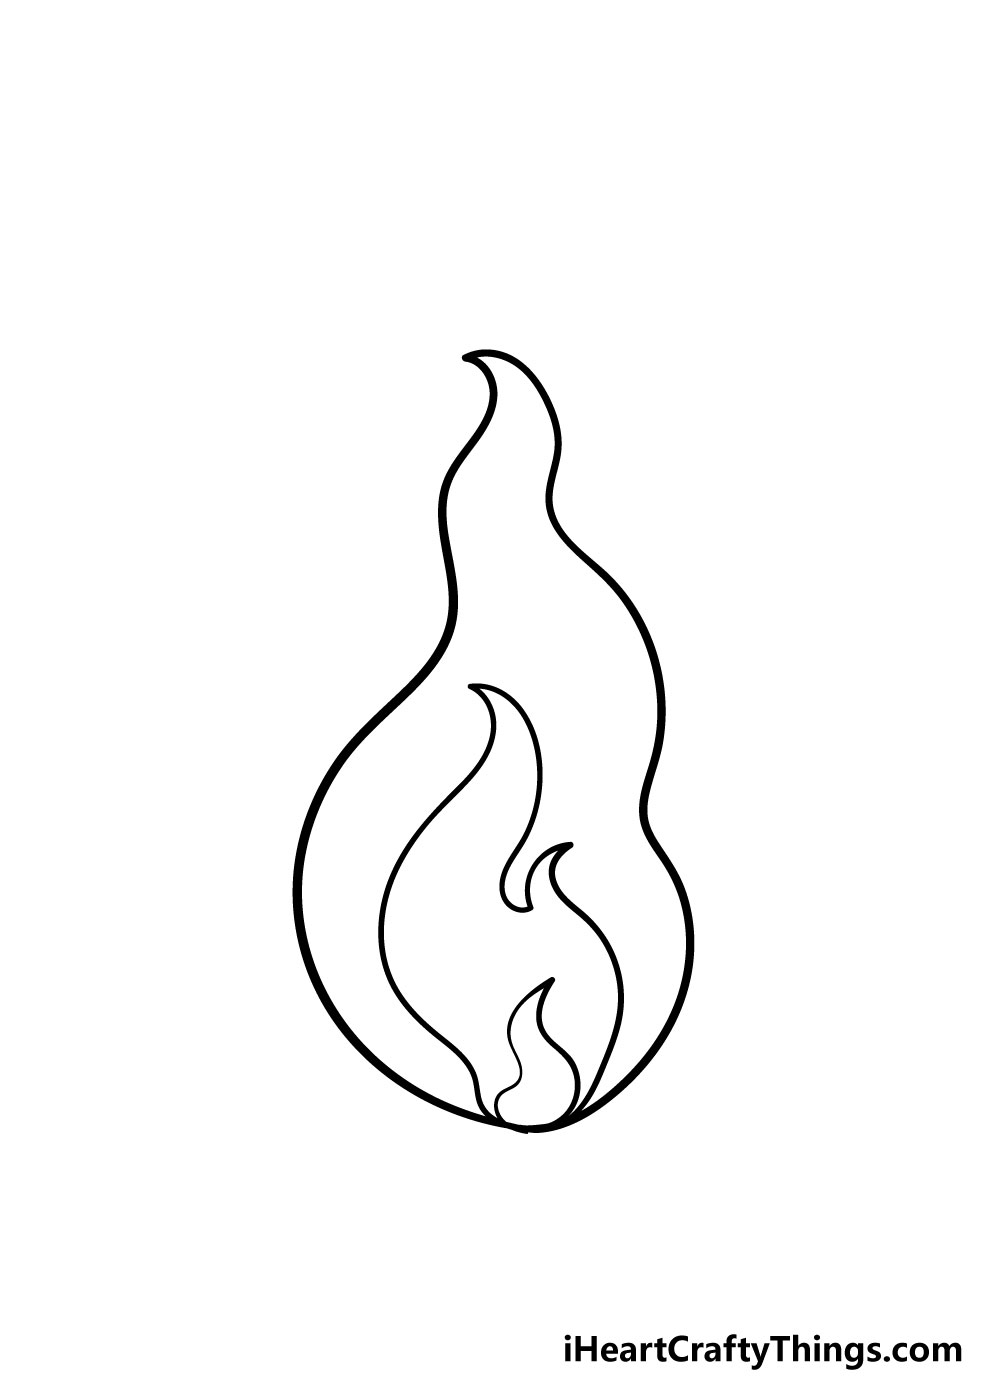 How to draw fire 3